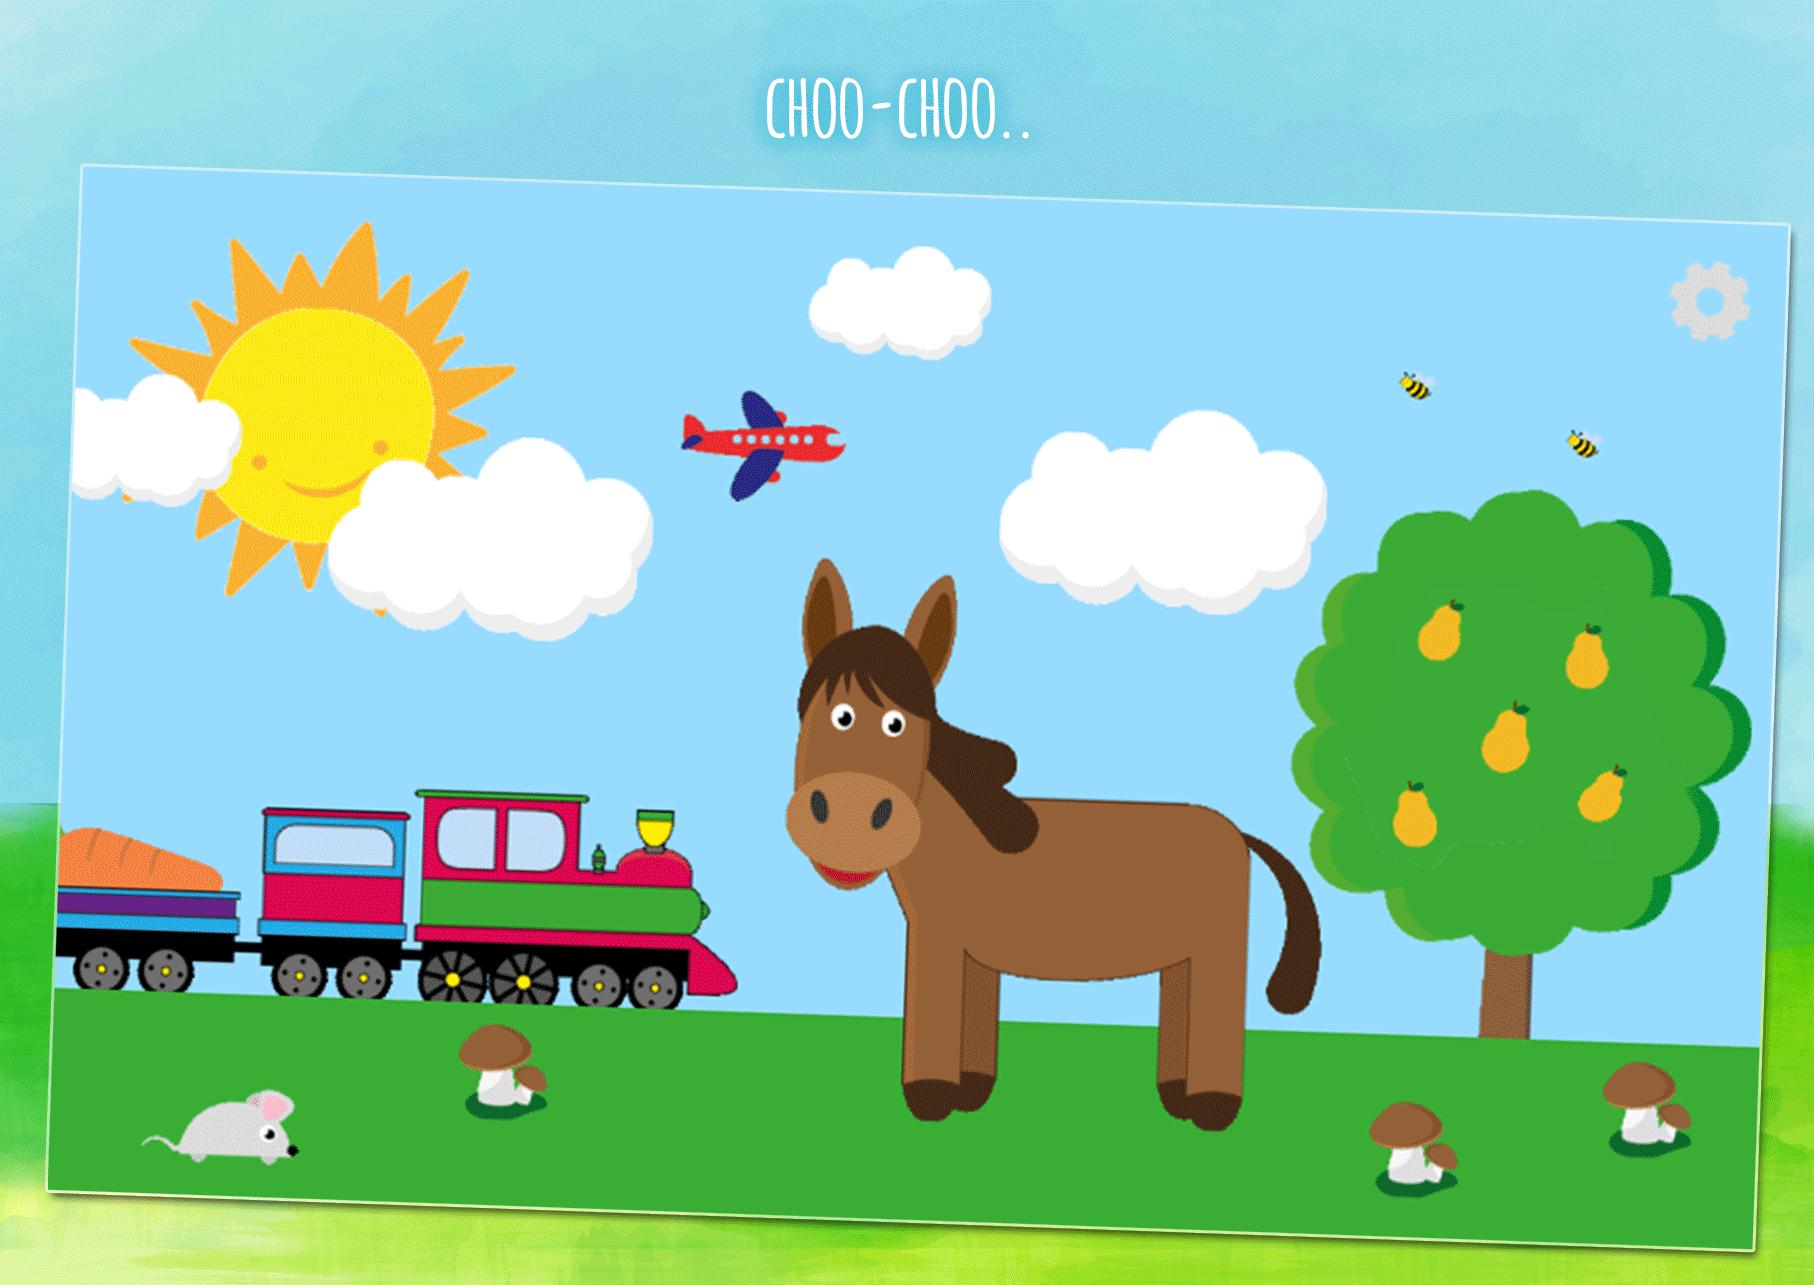 Moo & animals - kids game for toddlers from 1 year 1.7.7 Screenshot 11